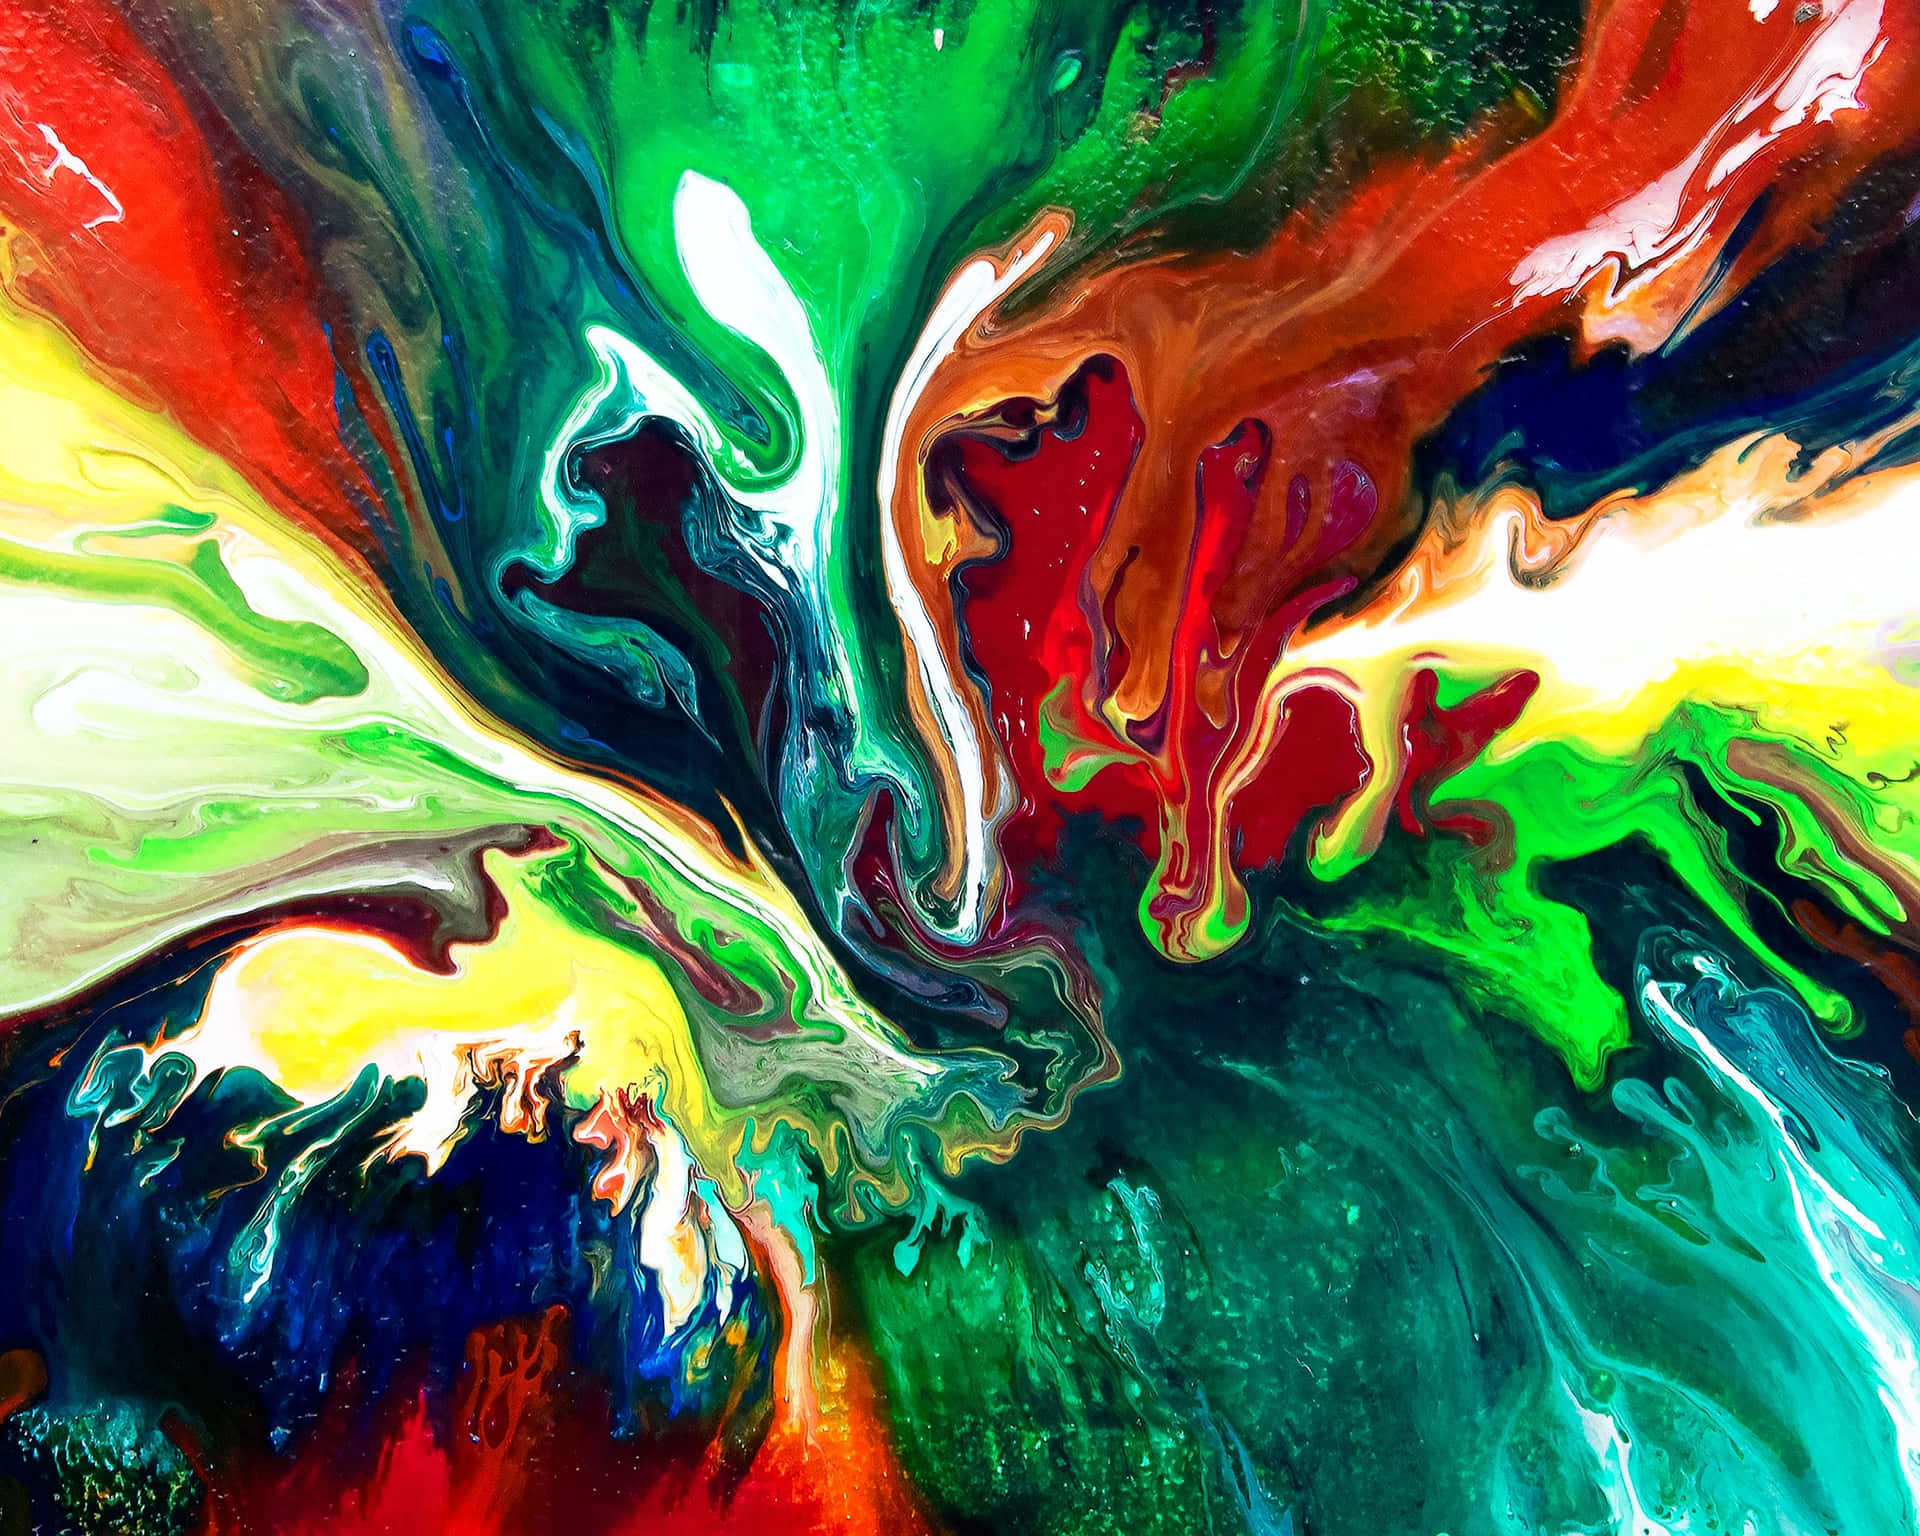 A Colorful Abstract Painting